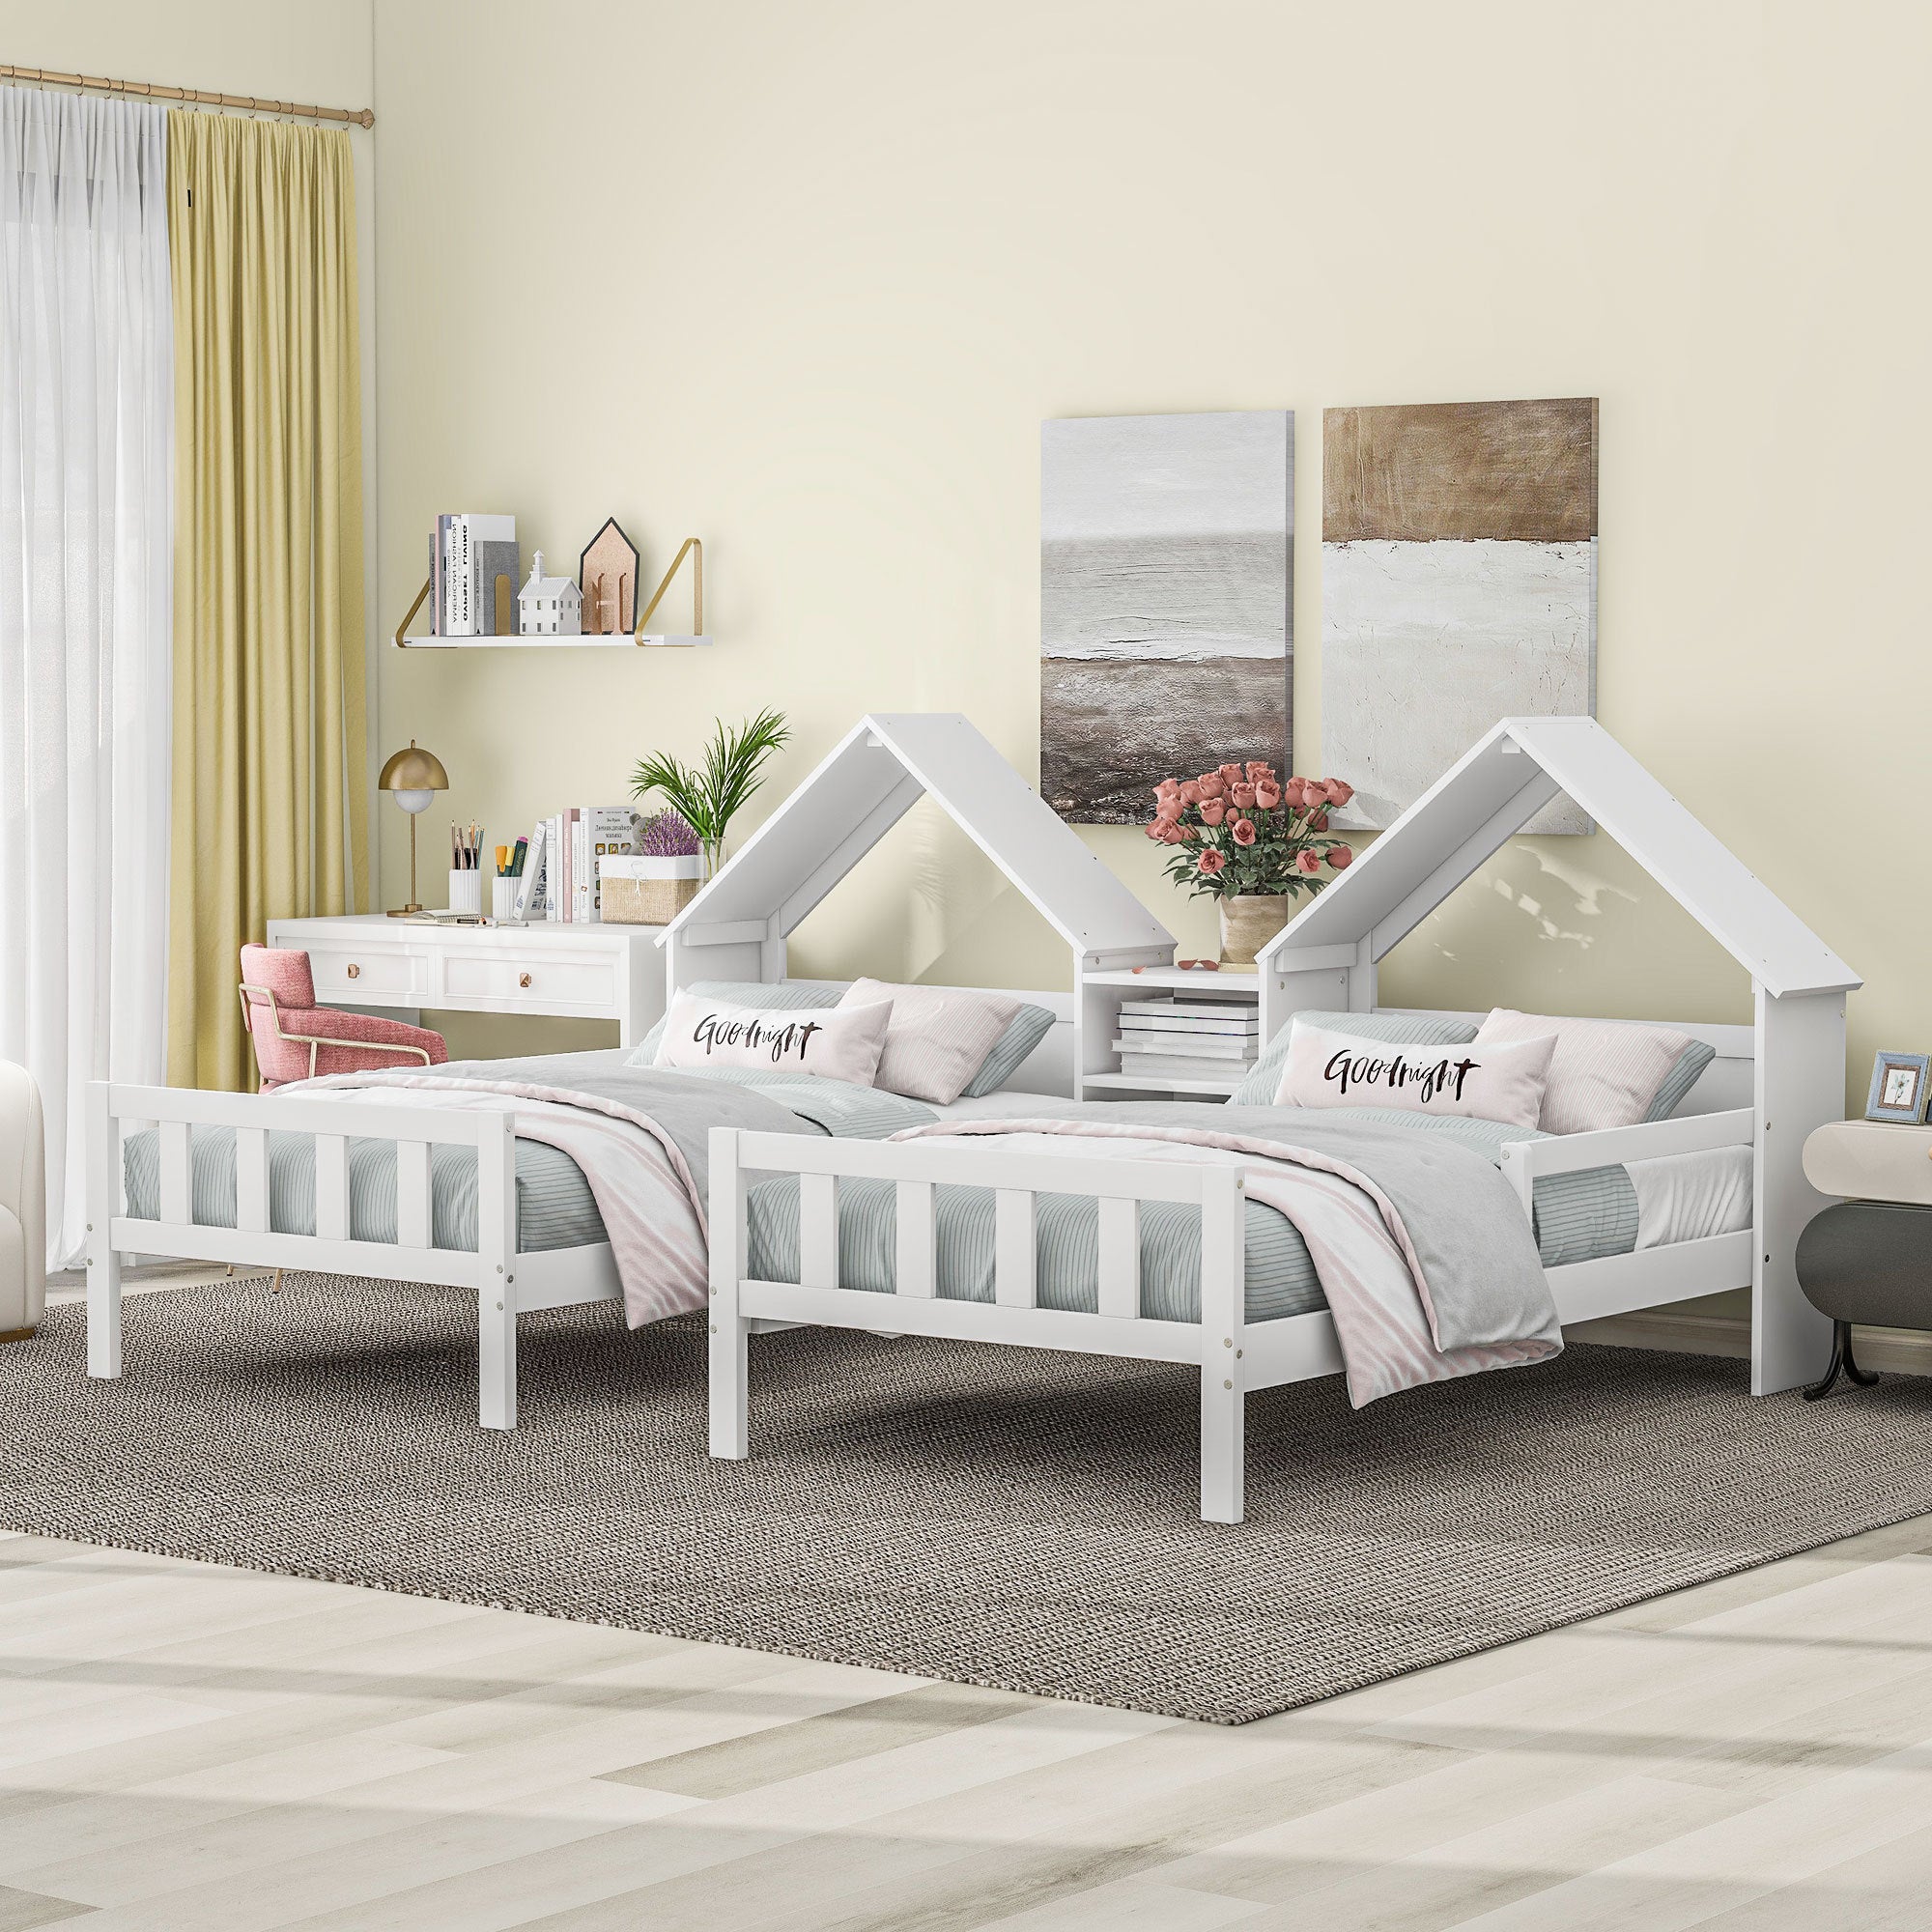 🆓🚛 Double Twin Size Platform Bed With House-Shaped Headboard and a Built-In Nightstand, White